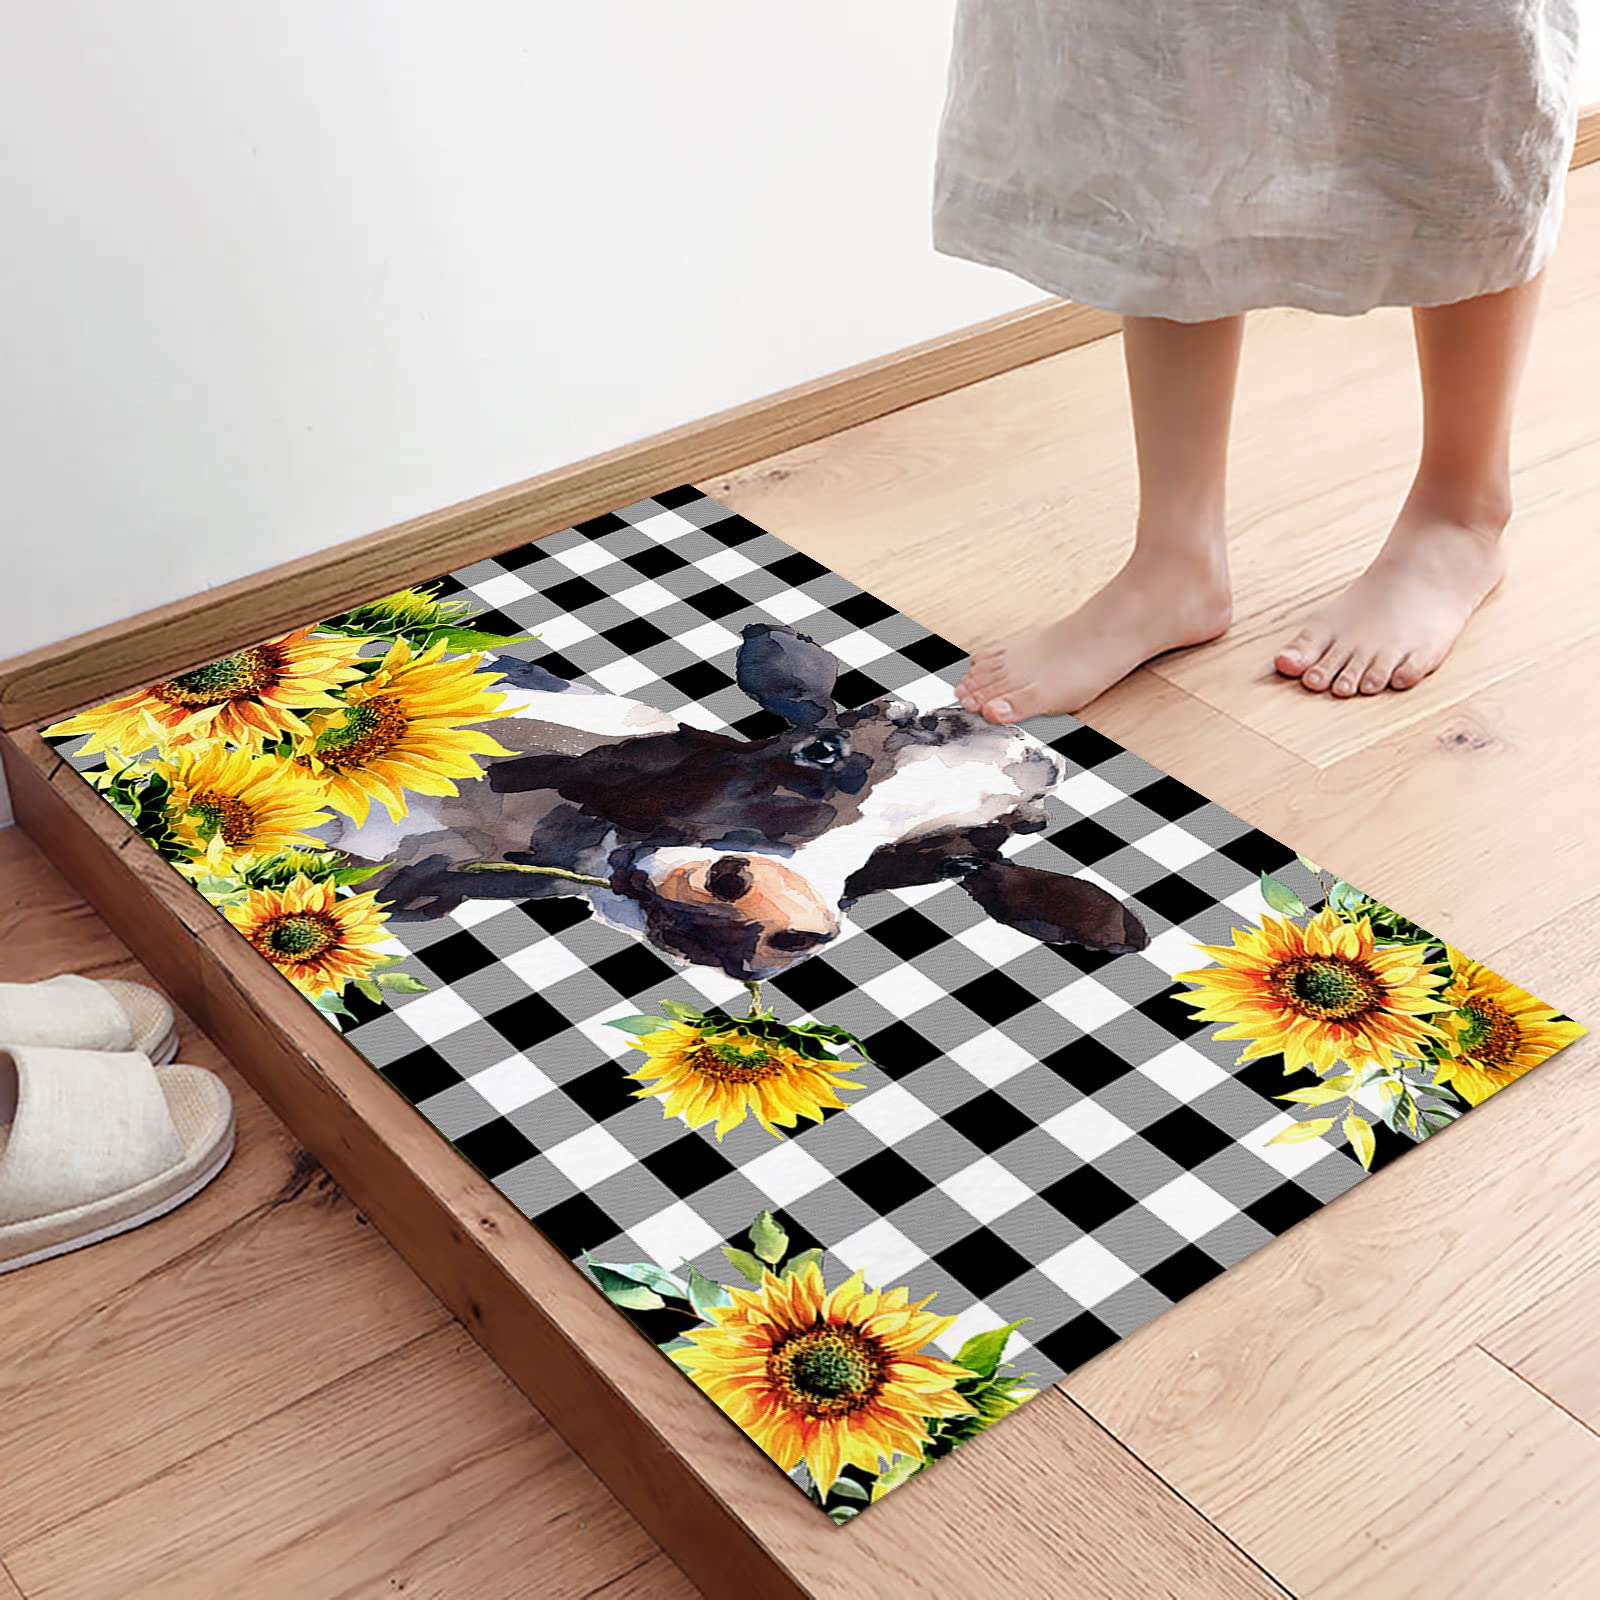 Beauty Decor 2 Piece Kitchen Mats Cushioned Kitchen Rug Farm Cow and Sunflower Black and White Buffalo Plaid Non Slip Thick Floor Comfort Mat Sets with Runner